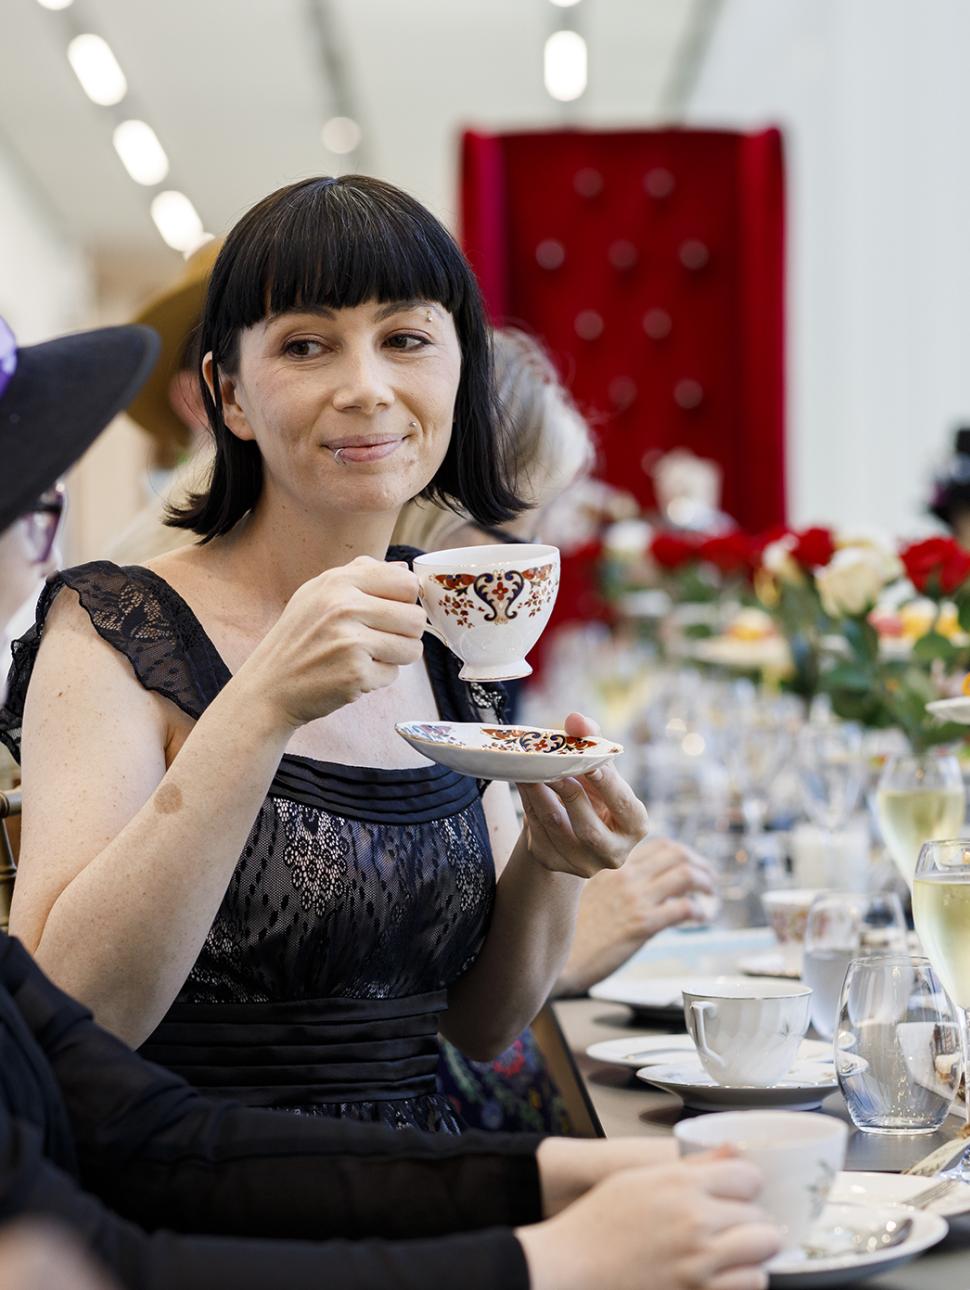 People sitting at a long table holding teacups. The table is set with food and drink items